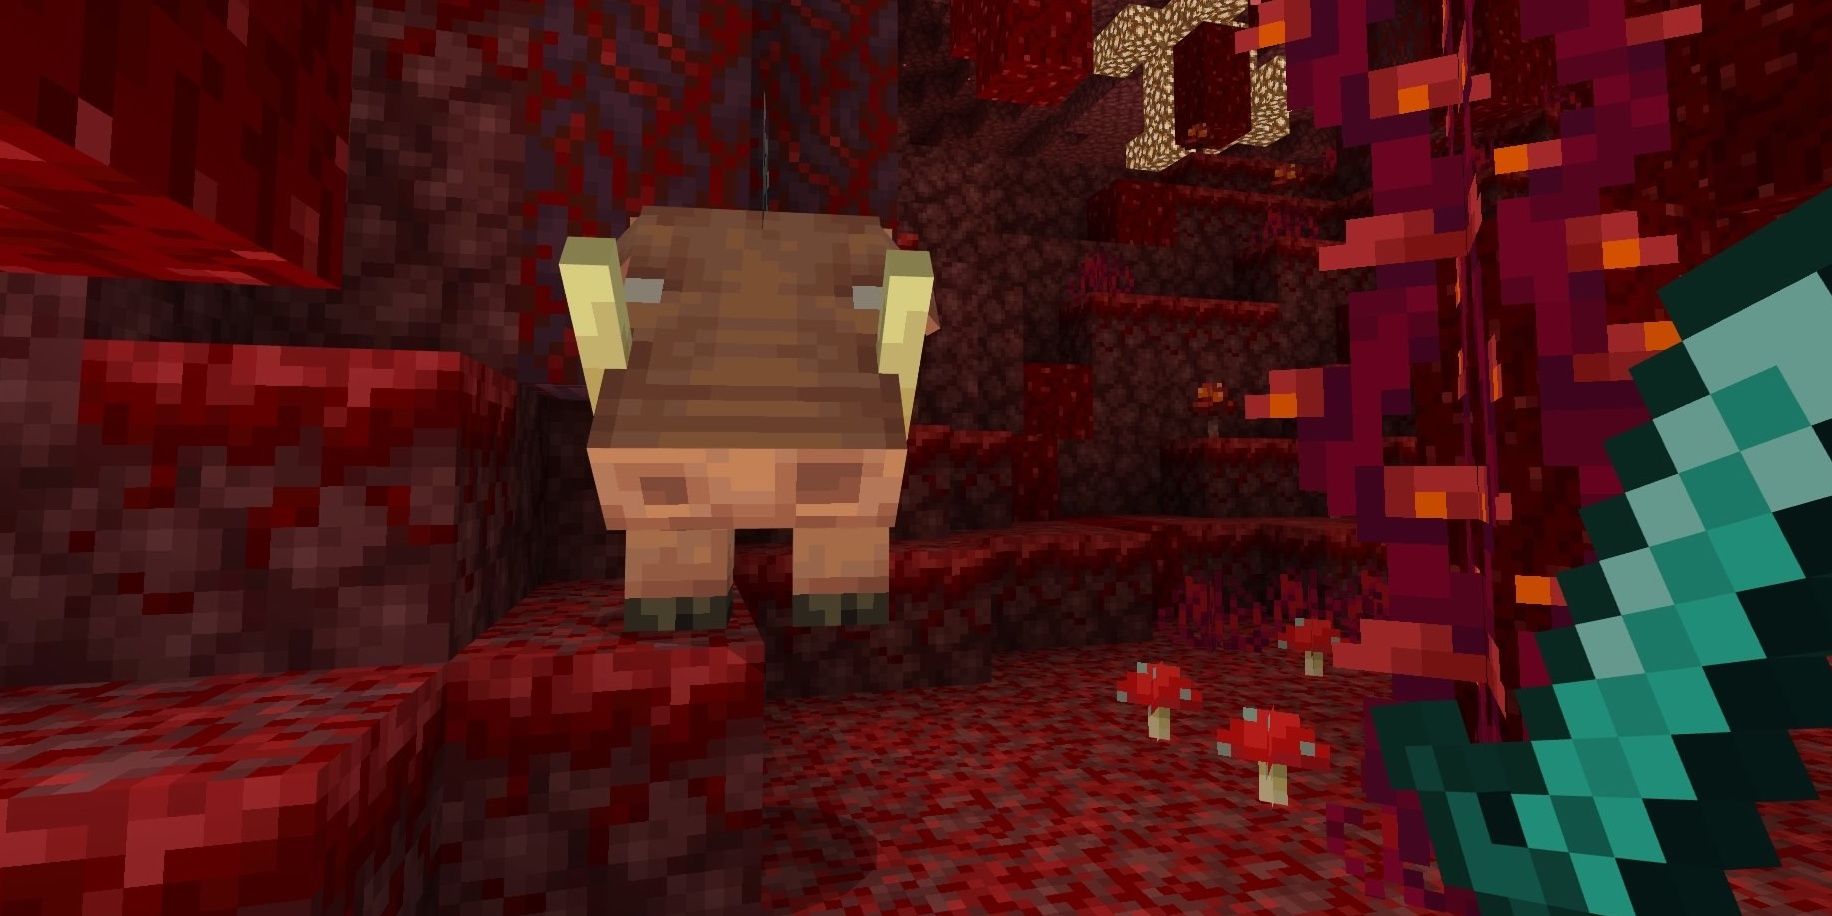 The Minecraft mob the Hoglin facing the player in the Nether